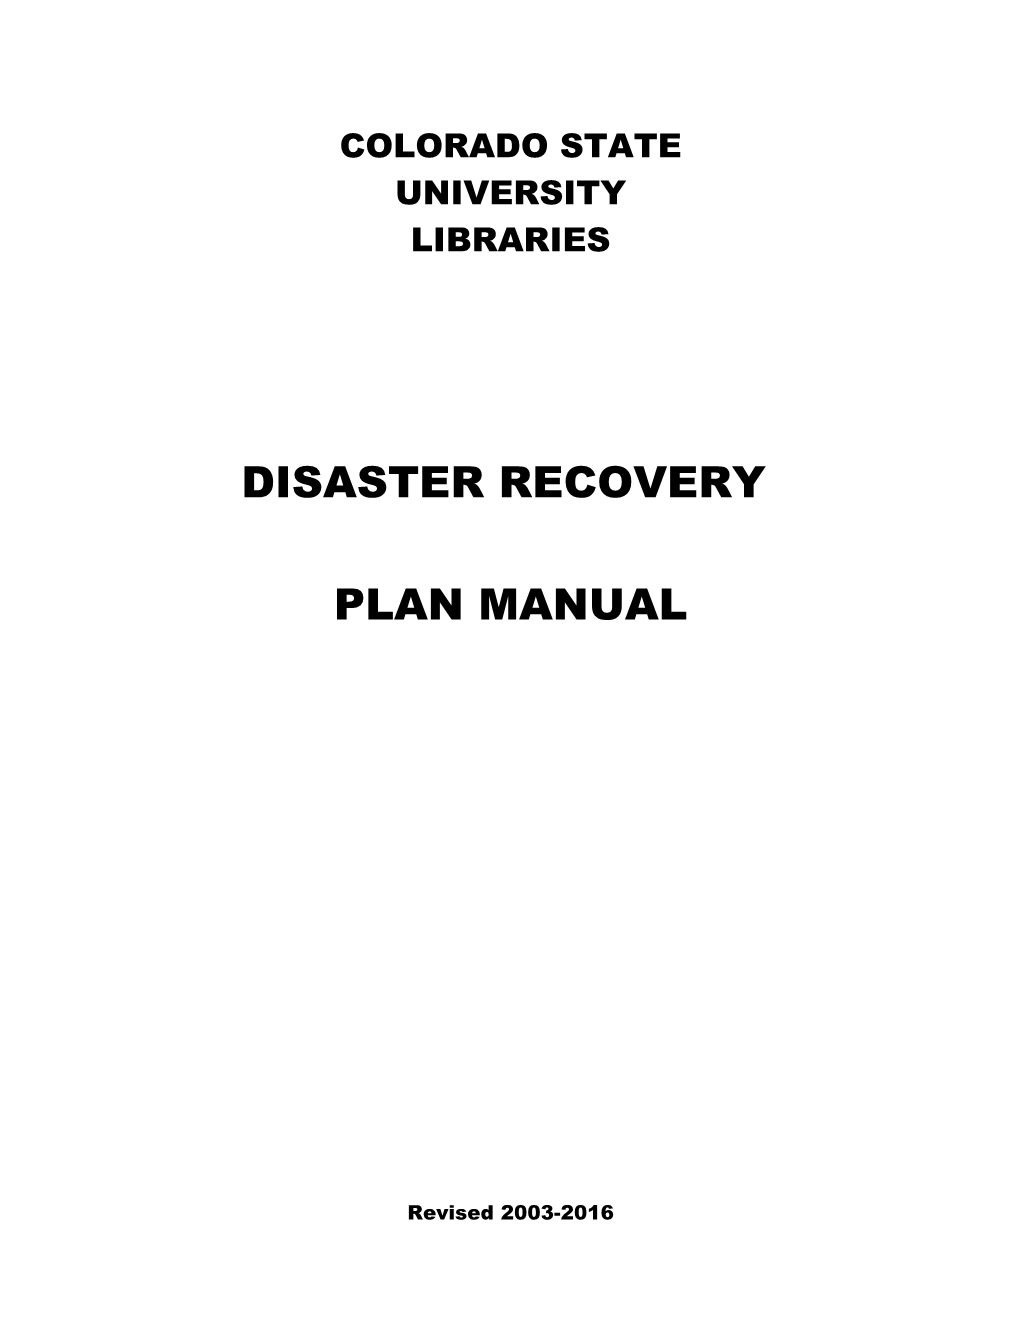 Disaster Recovery Plan Manual